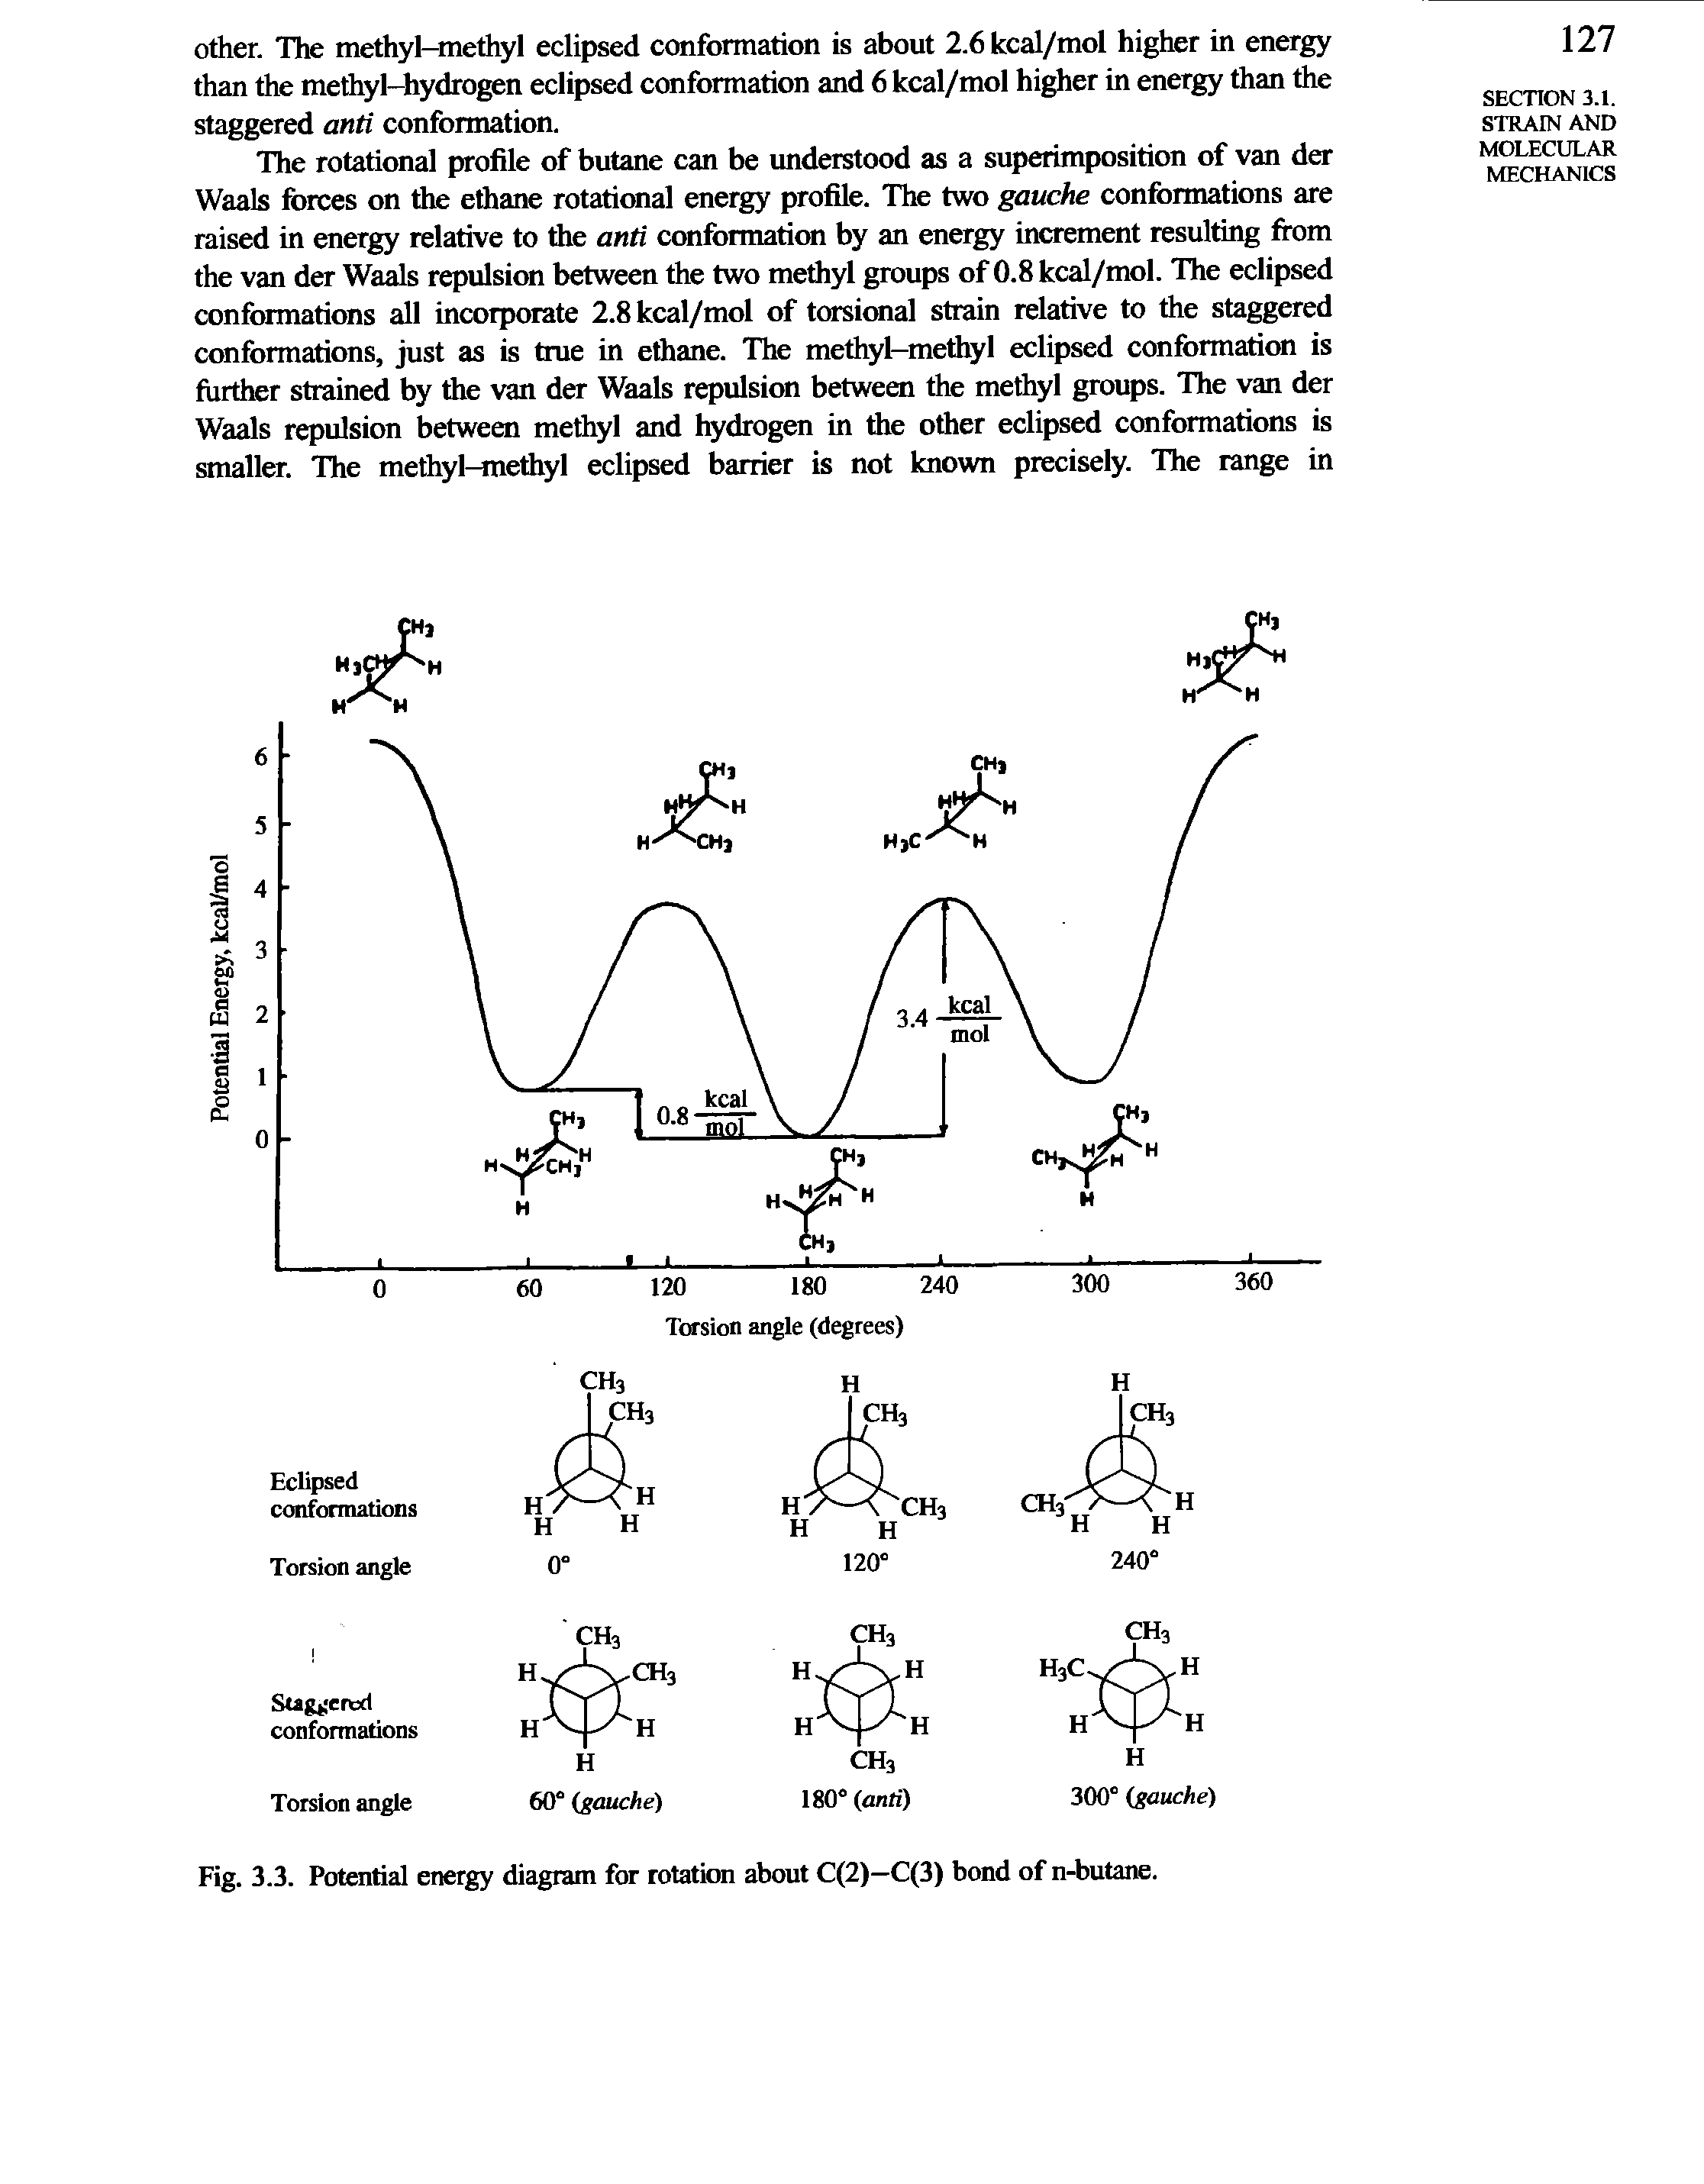 Fig. 3.3. Potential energy diagram for rotation about C(2)—C(3) bond of n-butane.